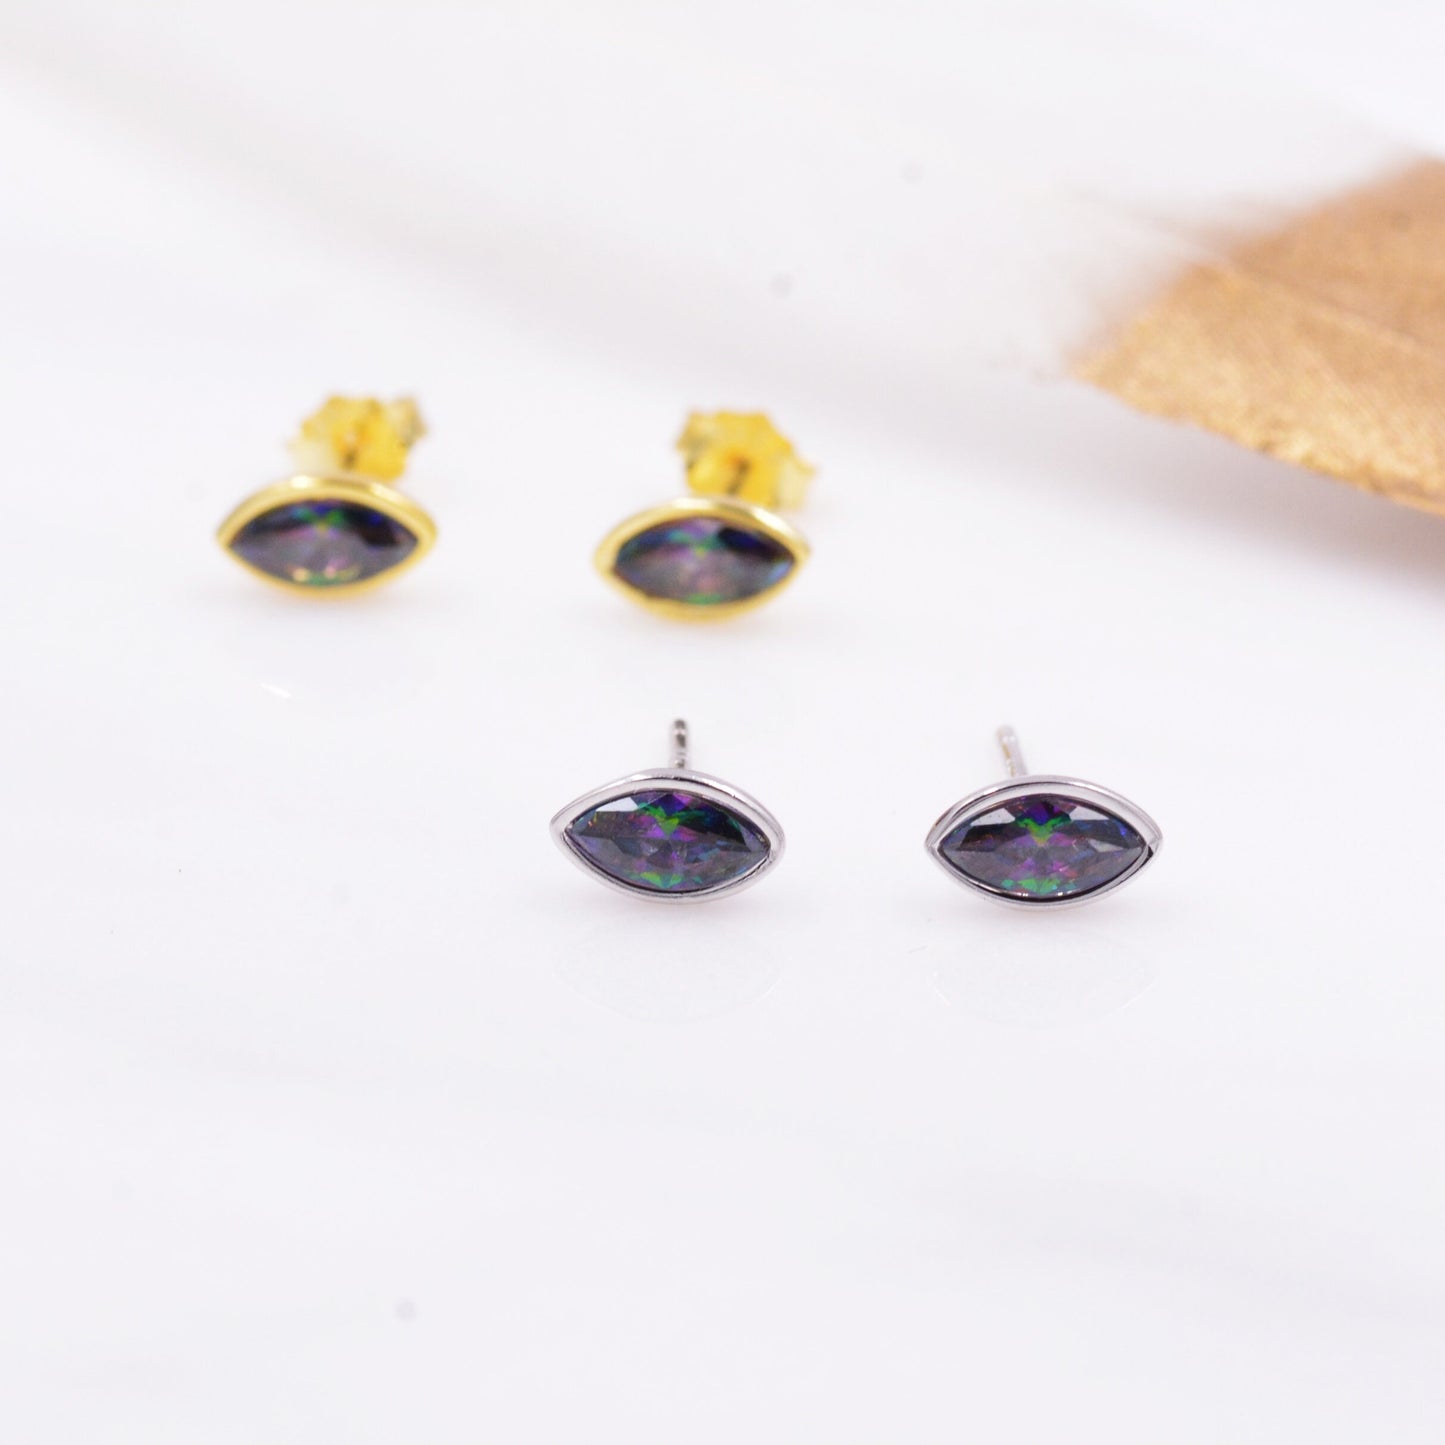 Mystic Topaz Marquise Stud Earrings in Sterling Silver, Gold or Silver, Minimalist Geometric Design